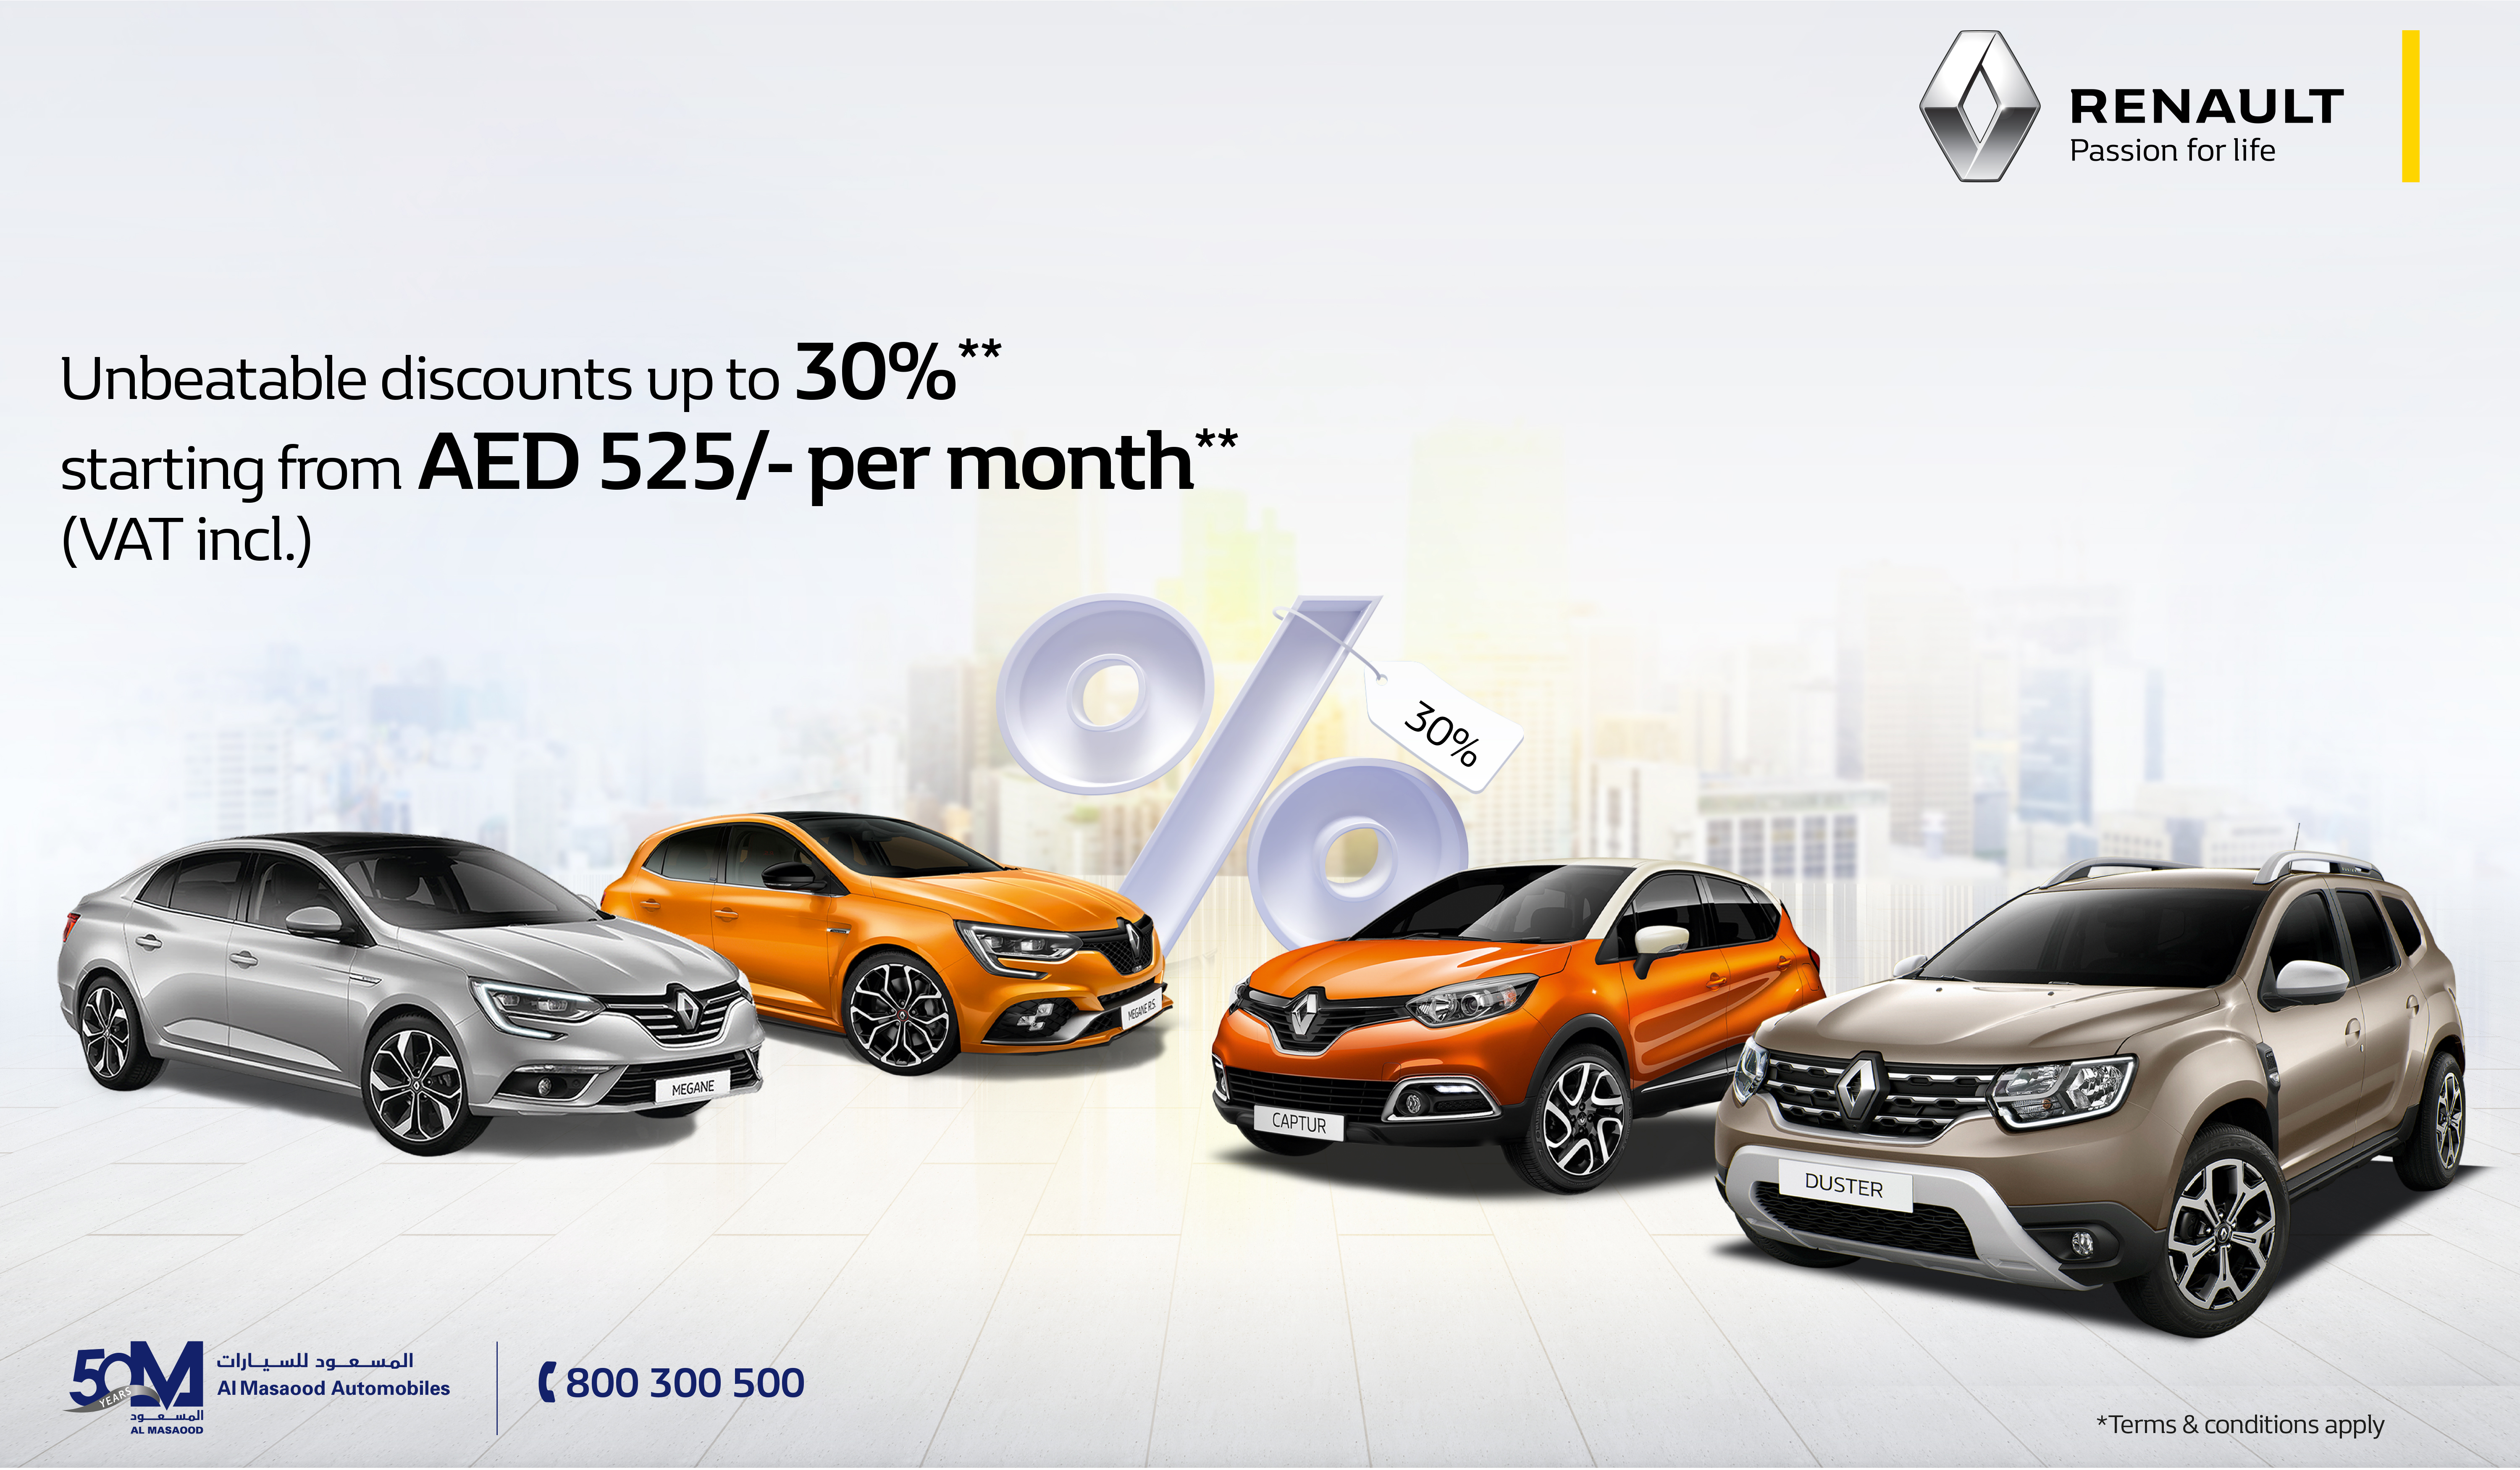 Al Masaood Automobiles Launches ‘Drive Your Renault With Our Best Offer’ Campaign